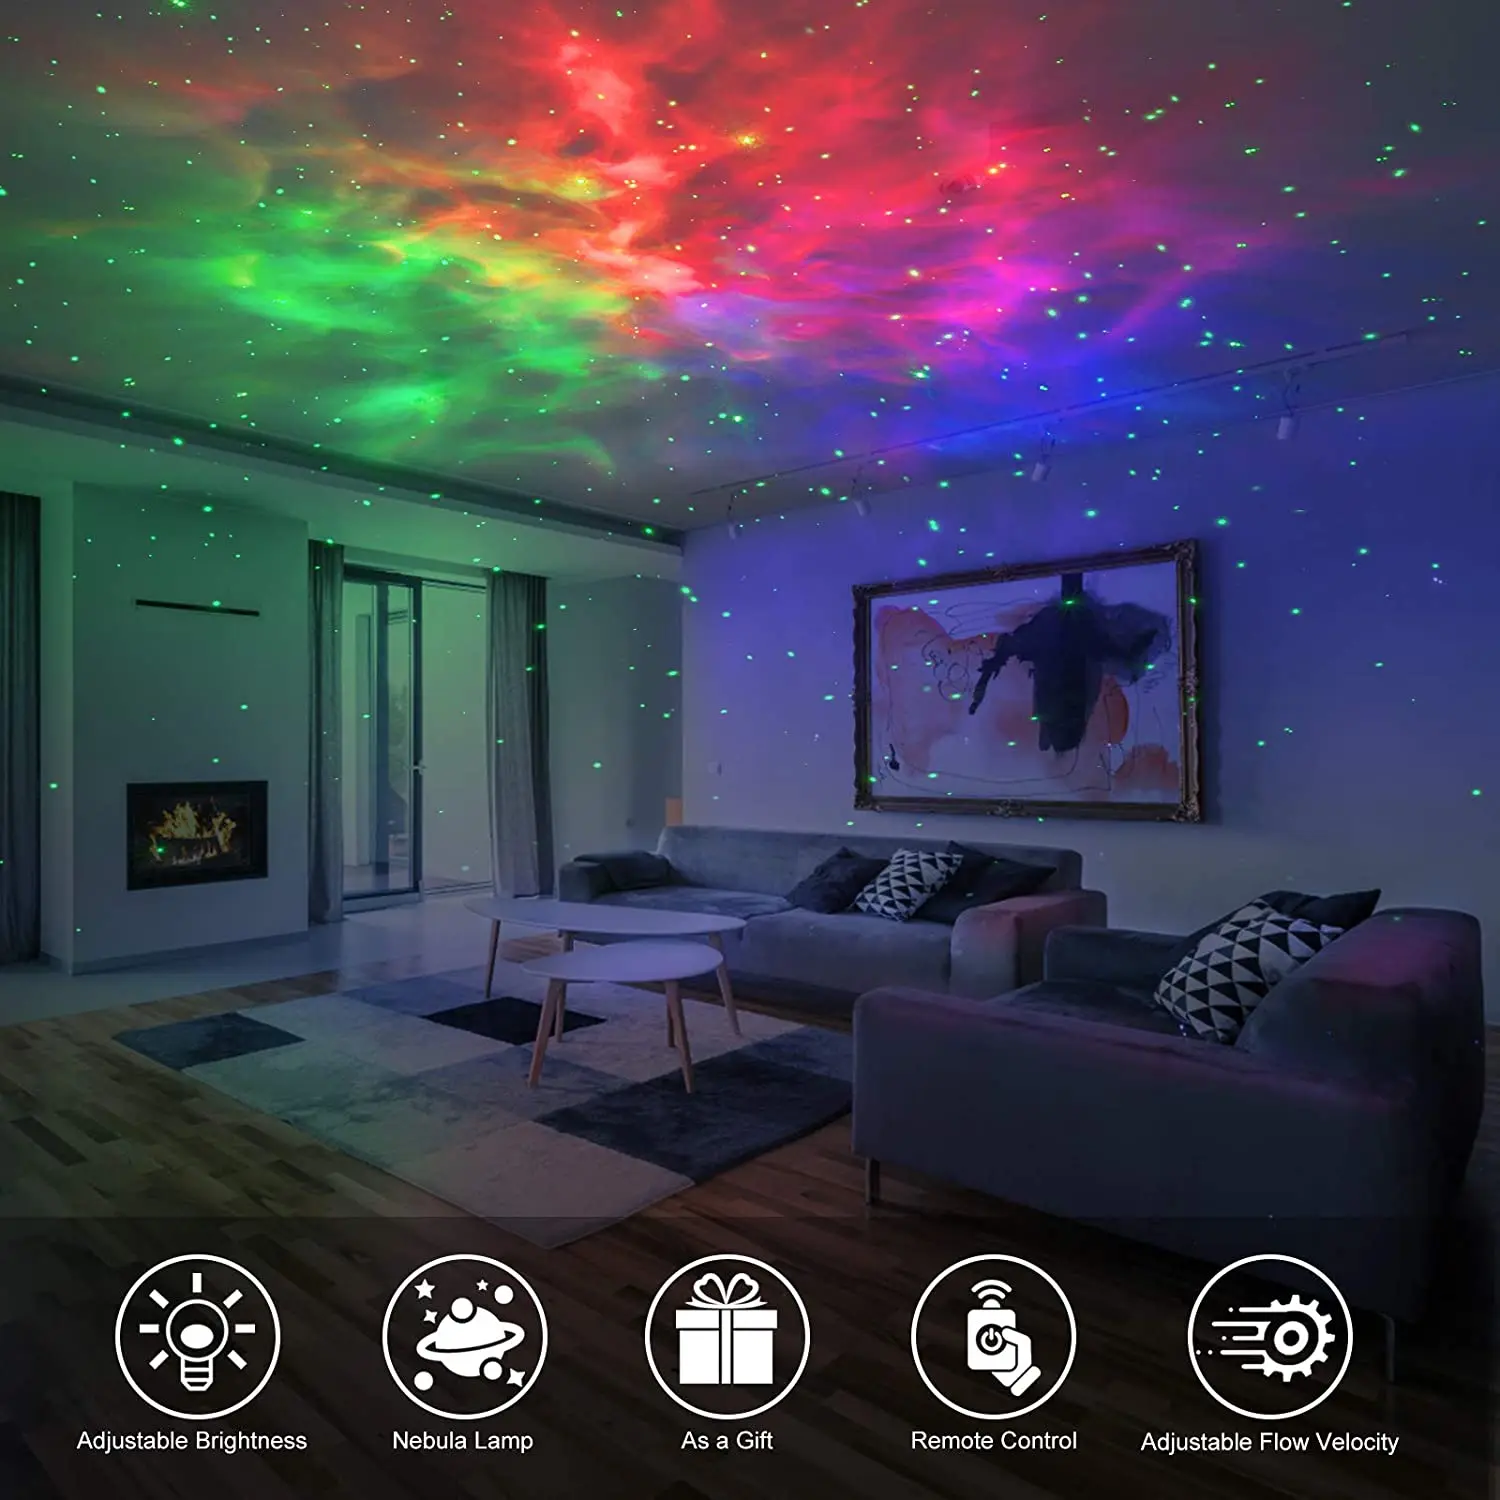 Galaxy Star Projector Light,Star Projector lamp with Colorful Nebula Cloud Ocean Wave